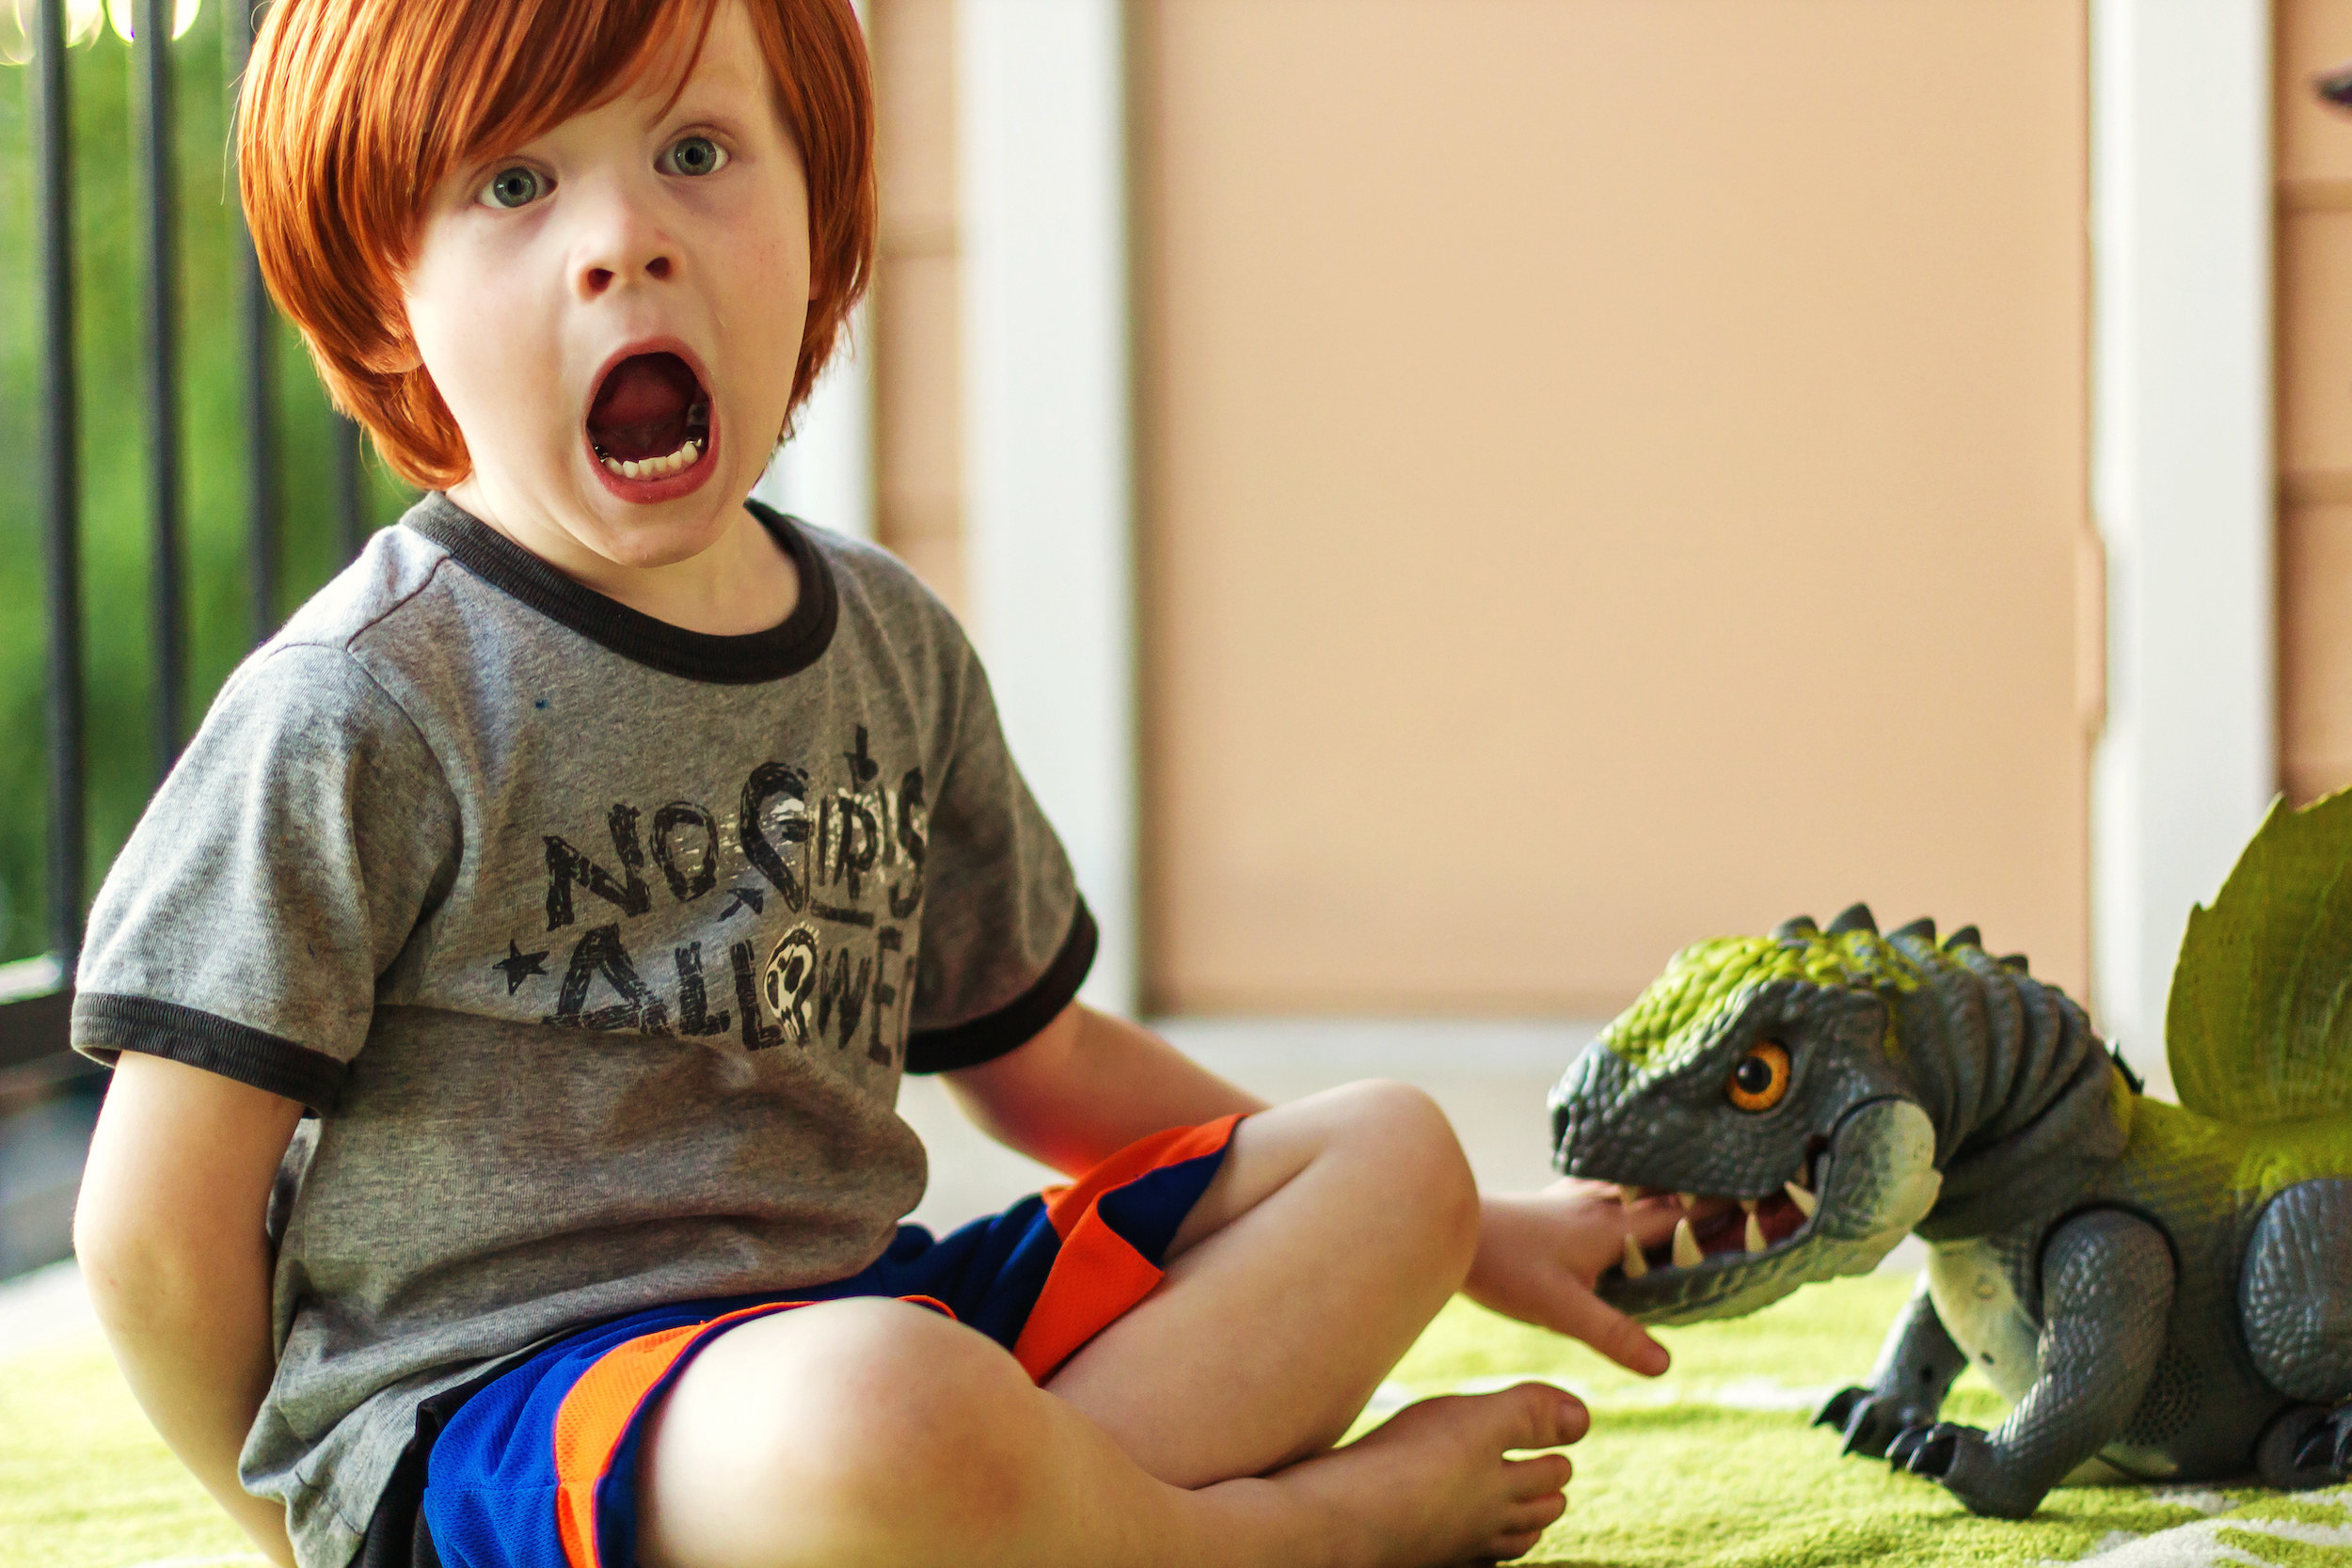 A little kid screaming with his hand in a dinosaur toy&#x27;s mouth